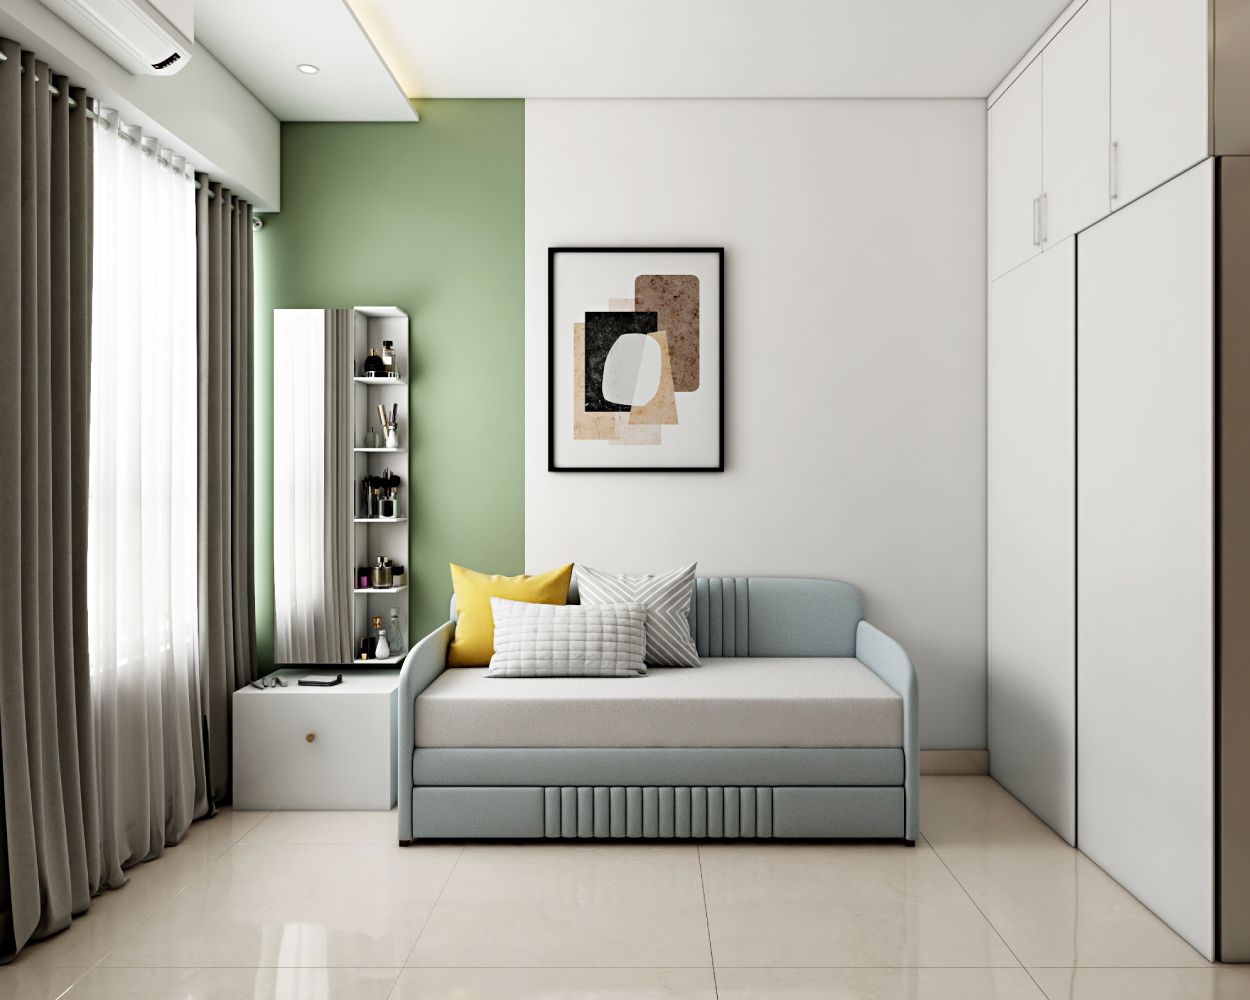 Modern Green And White Guest Bedroom Design With Sofa-Cum-Bend